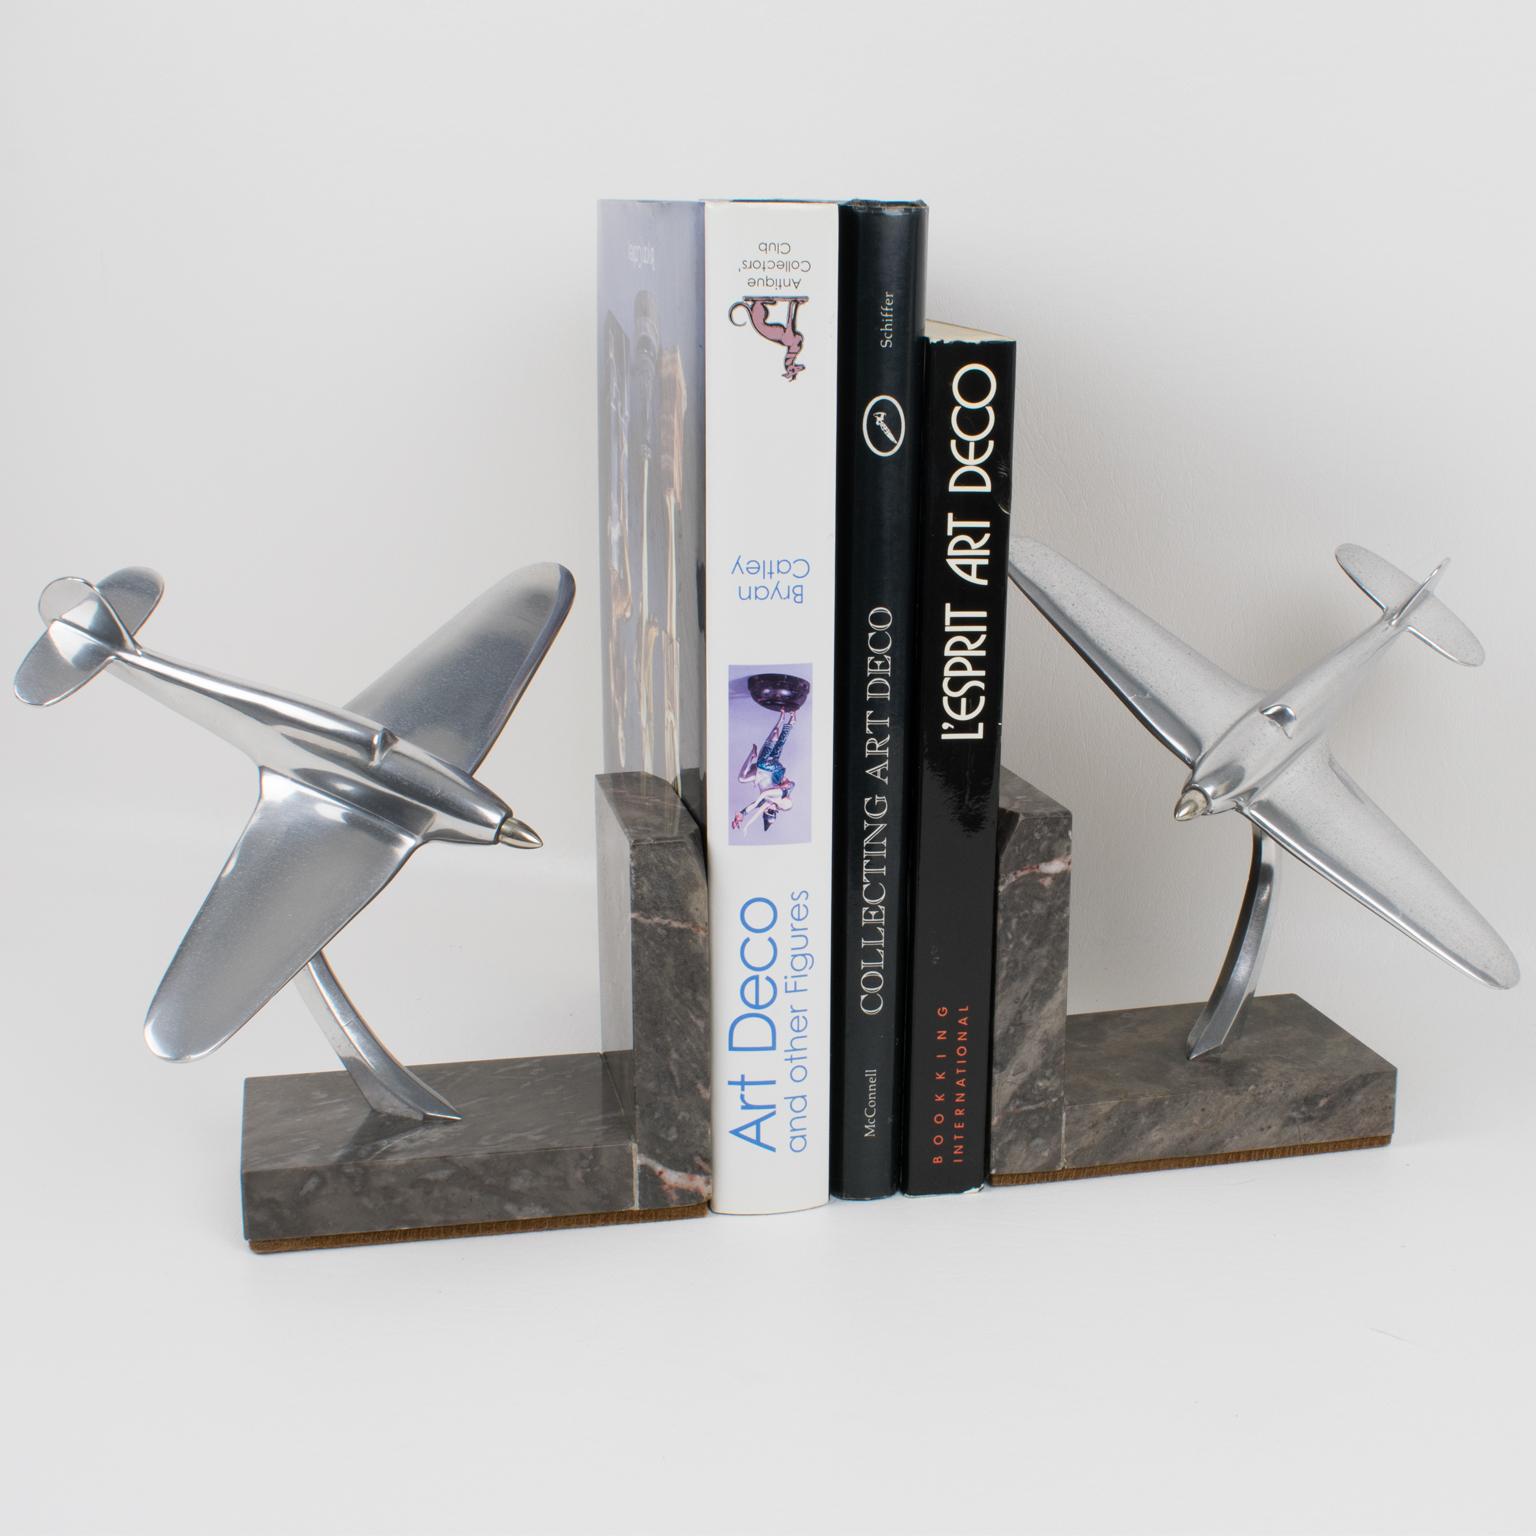 Elegant 1940s French Art Deco aluminum airplane models mounted on a marble plinth to built great-looking bookends. These nice sculptural model airplanes are made with cast aluminum. Standing on an 